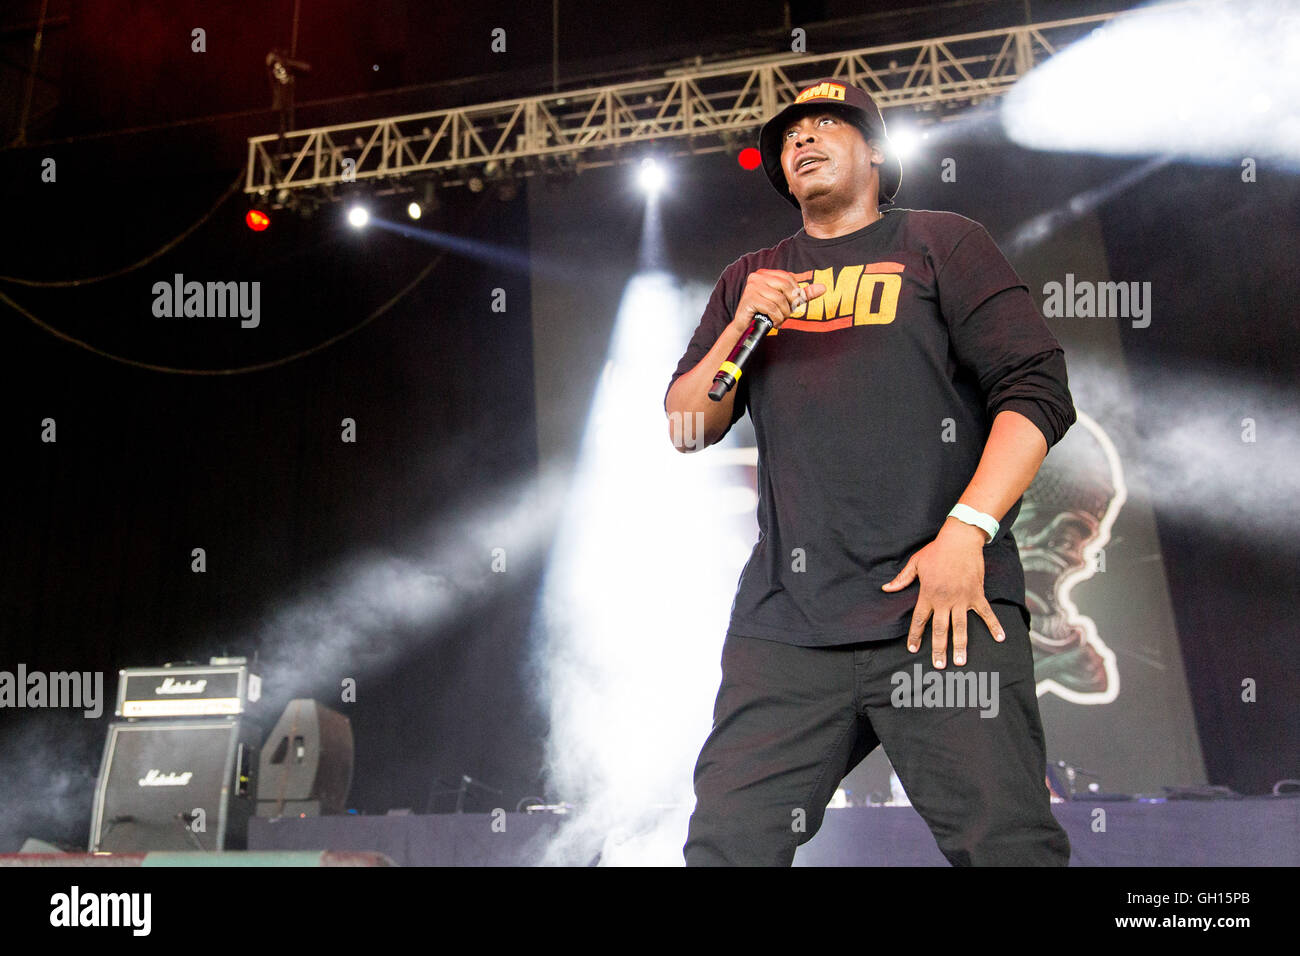 Tinley Park, Illinois, USA. 5th Aug, 2016. of EPMD performs live at Hollywood Casino Amphitheater during the Art of Rap Festival in Tinley Park, Illinois © Daniel DeSlover/ZUMA Wire/Alamy Live News Stock Photo